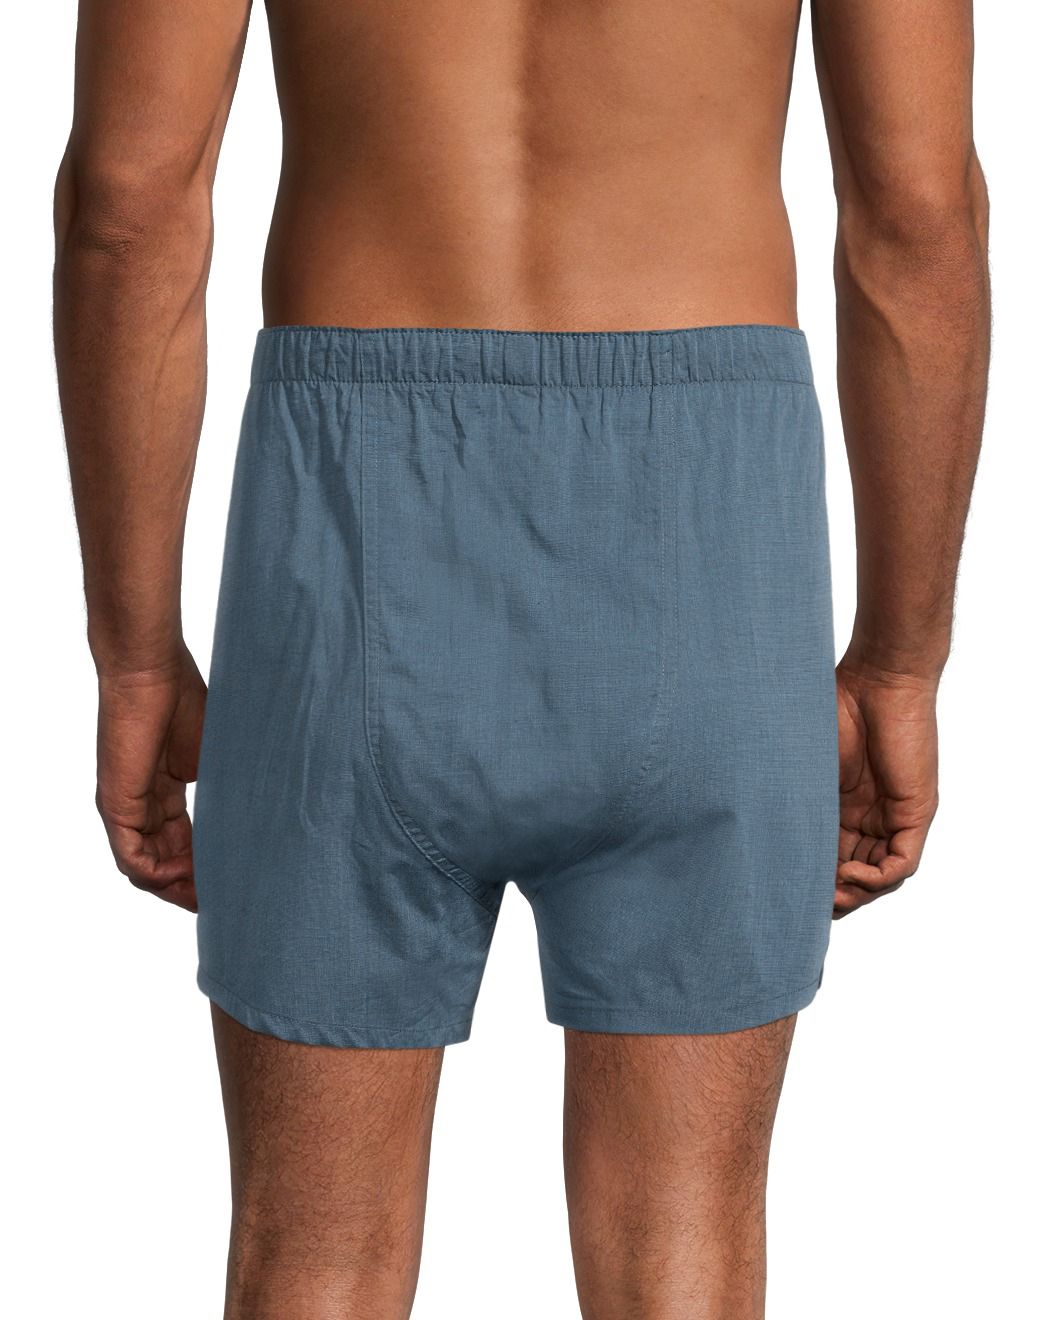 2-pack jersey-knit boxers